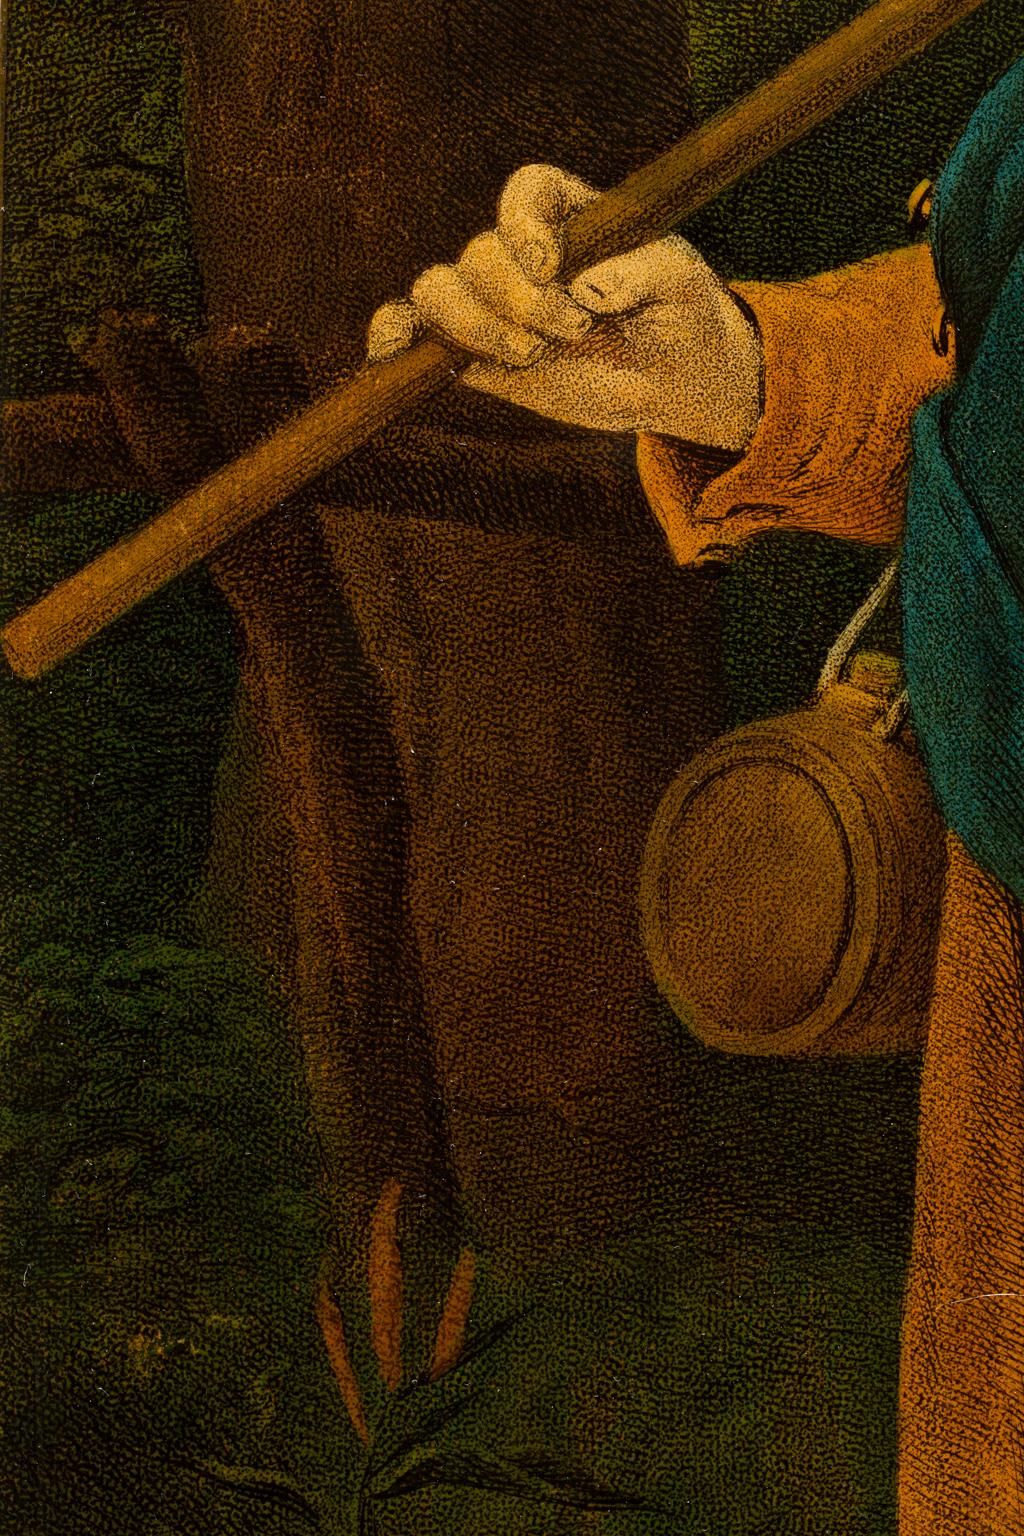 SALE ONE WEEK ONLY

This exceptional painting of a smoking peasant carrying a scythe with his daughter or wife in a rustic setting was created by the rare and difficult technique of reverse glass painting. The original painting that this reverse